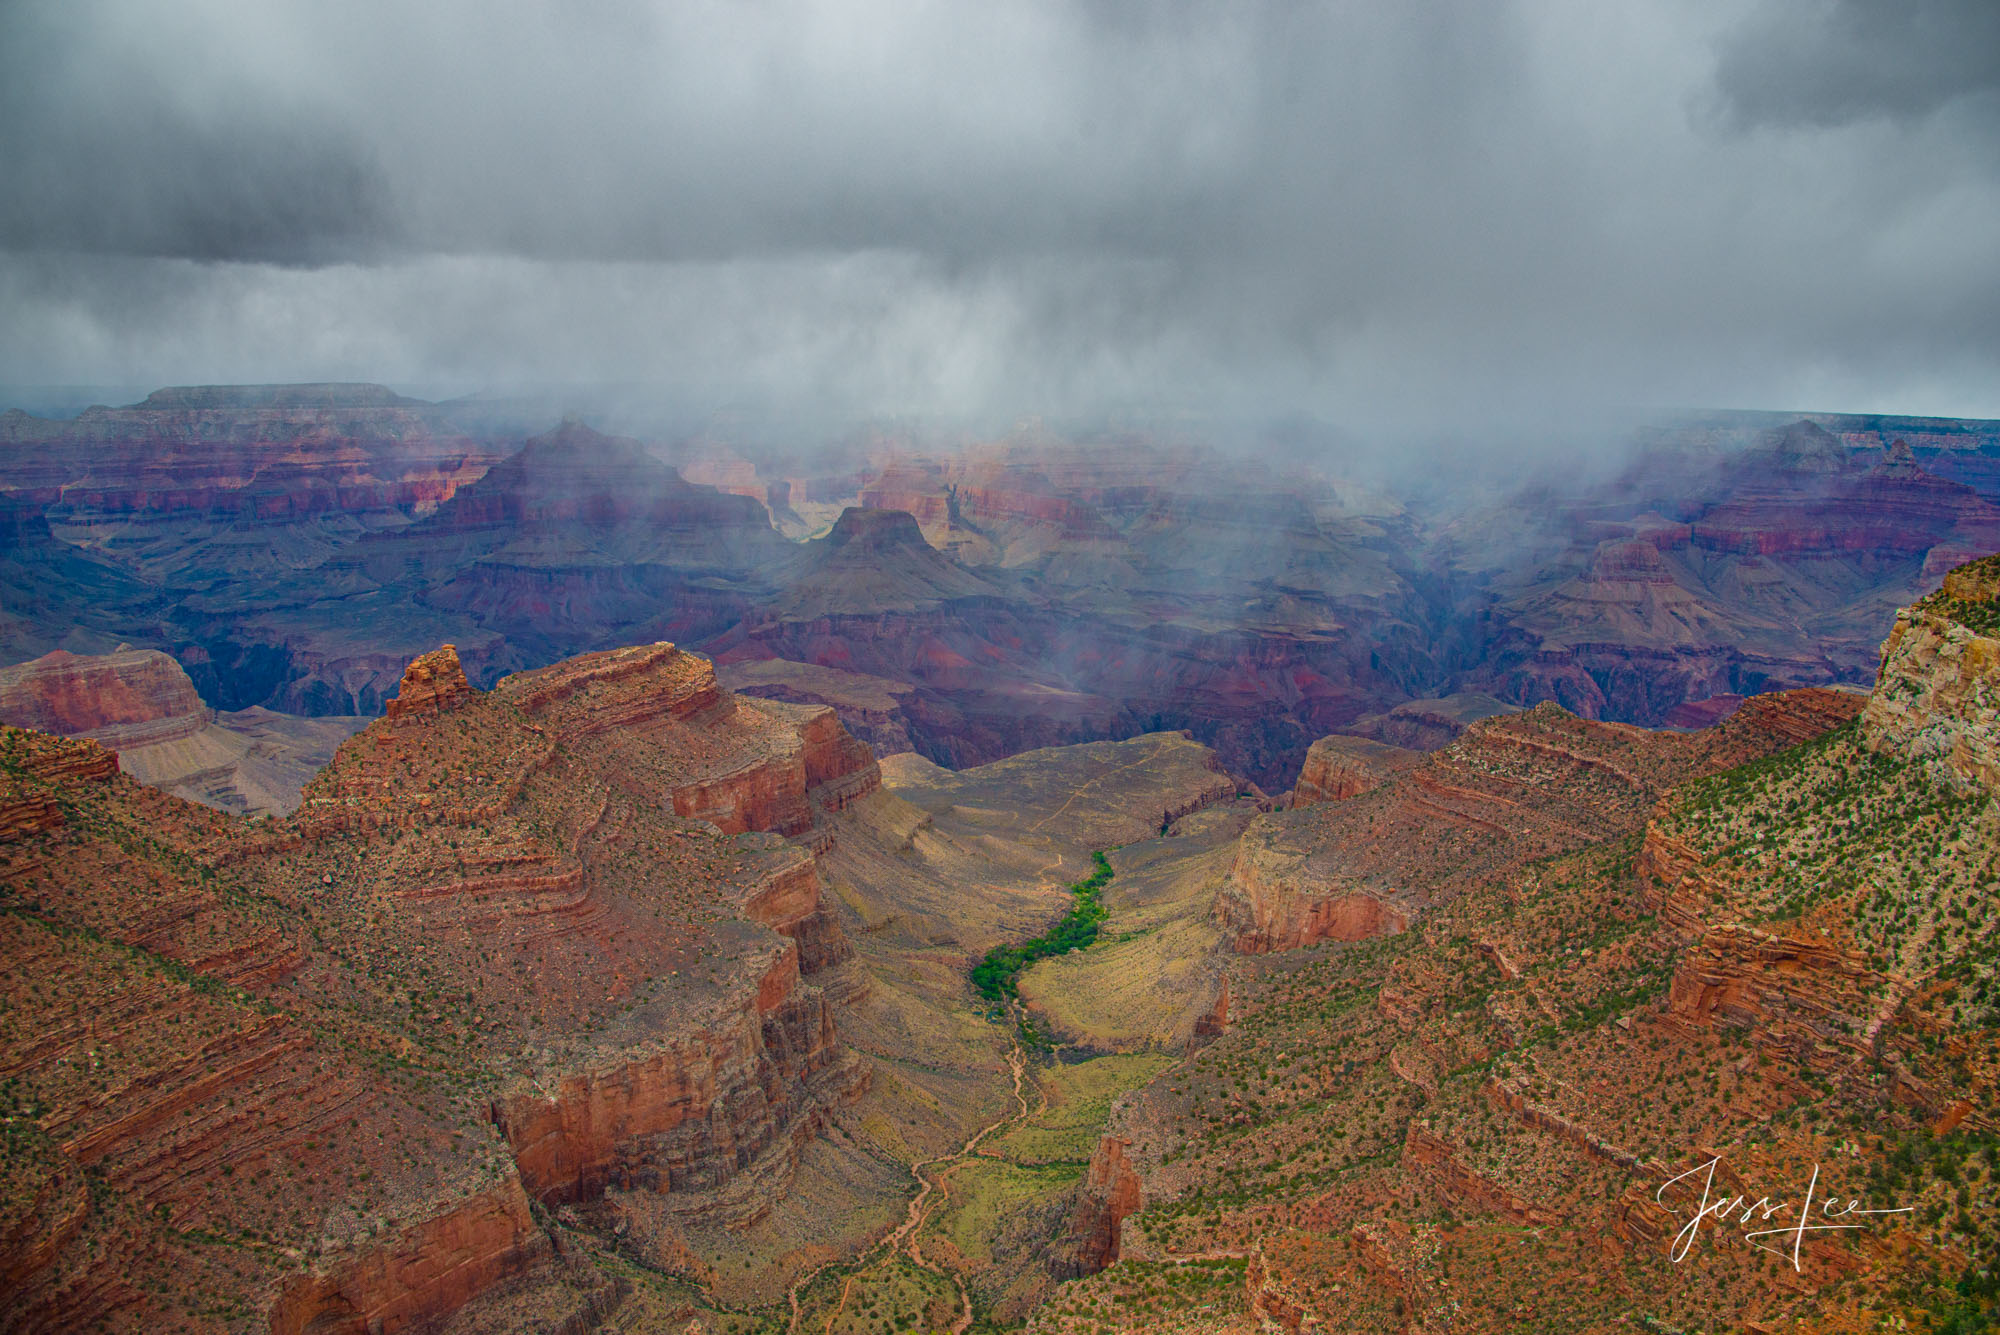 Rain storm rolling in over the Grand Canyon in Arizona. 